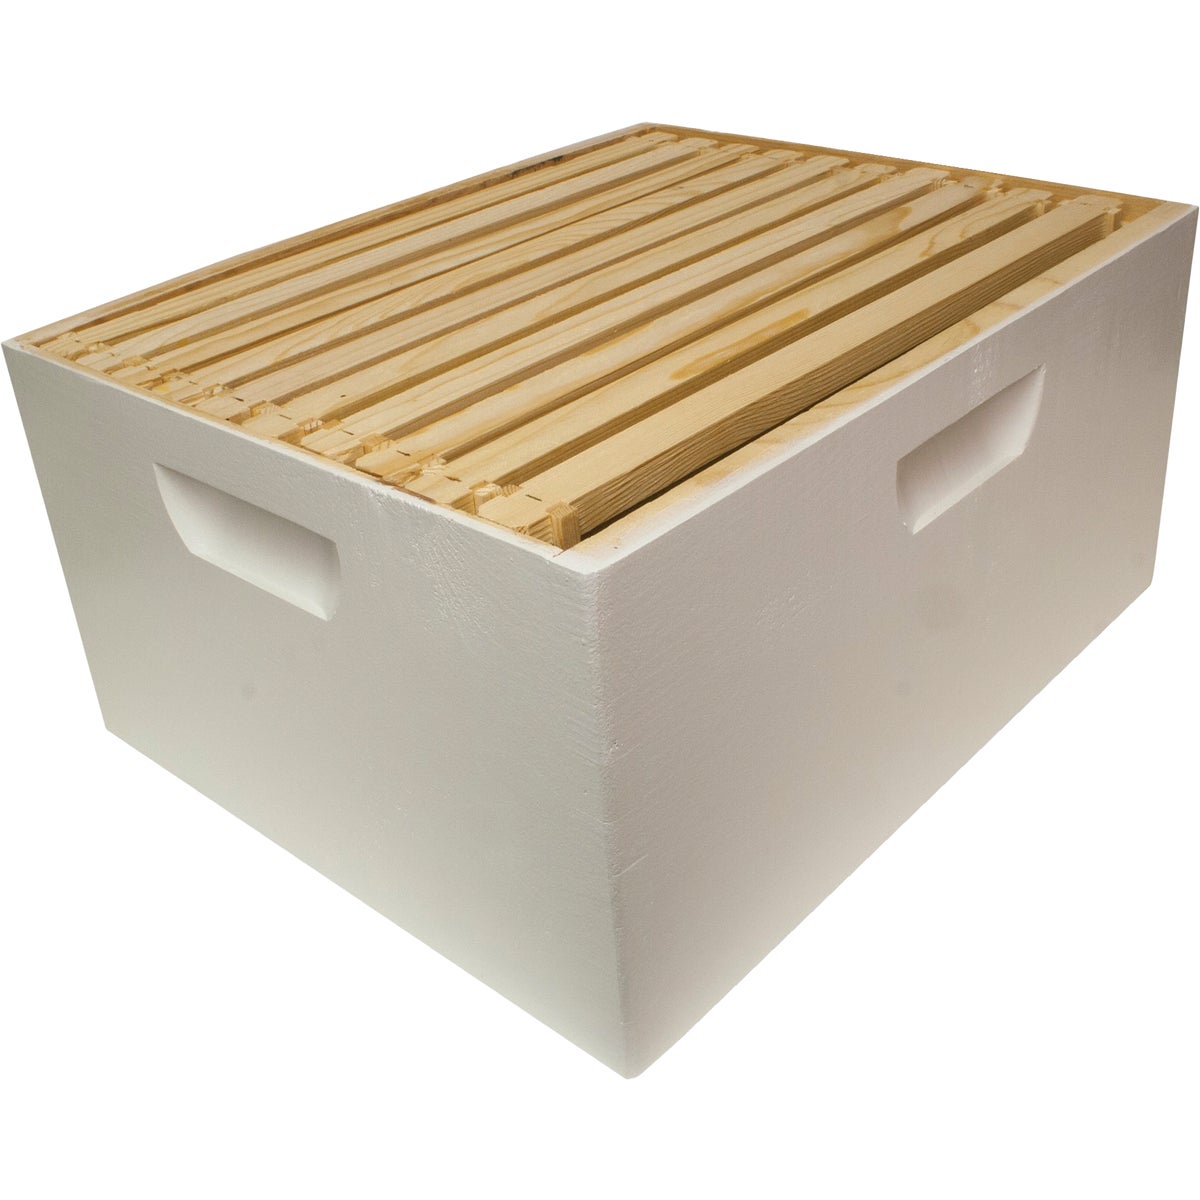 Item 704001, Painted and assembled deep box with 10 frames and plastic beeswax coated 